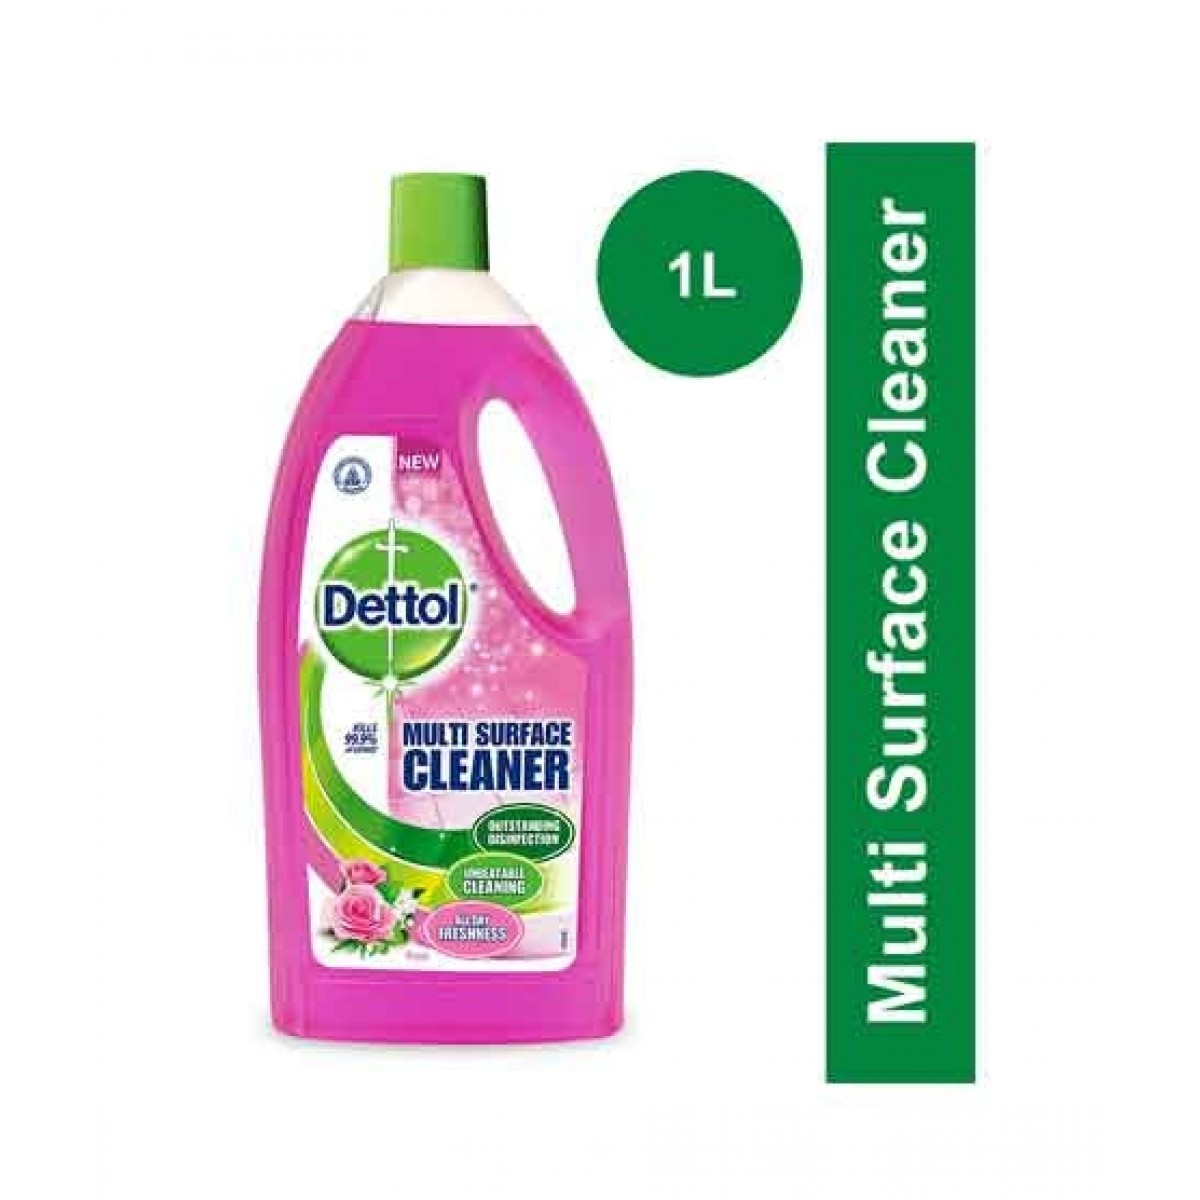 DETTOL SURFACE CLEANER